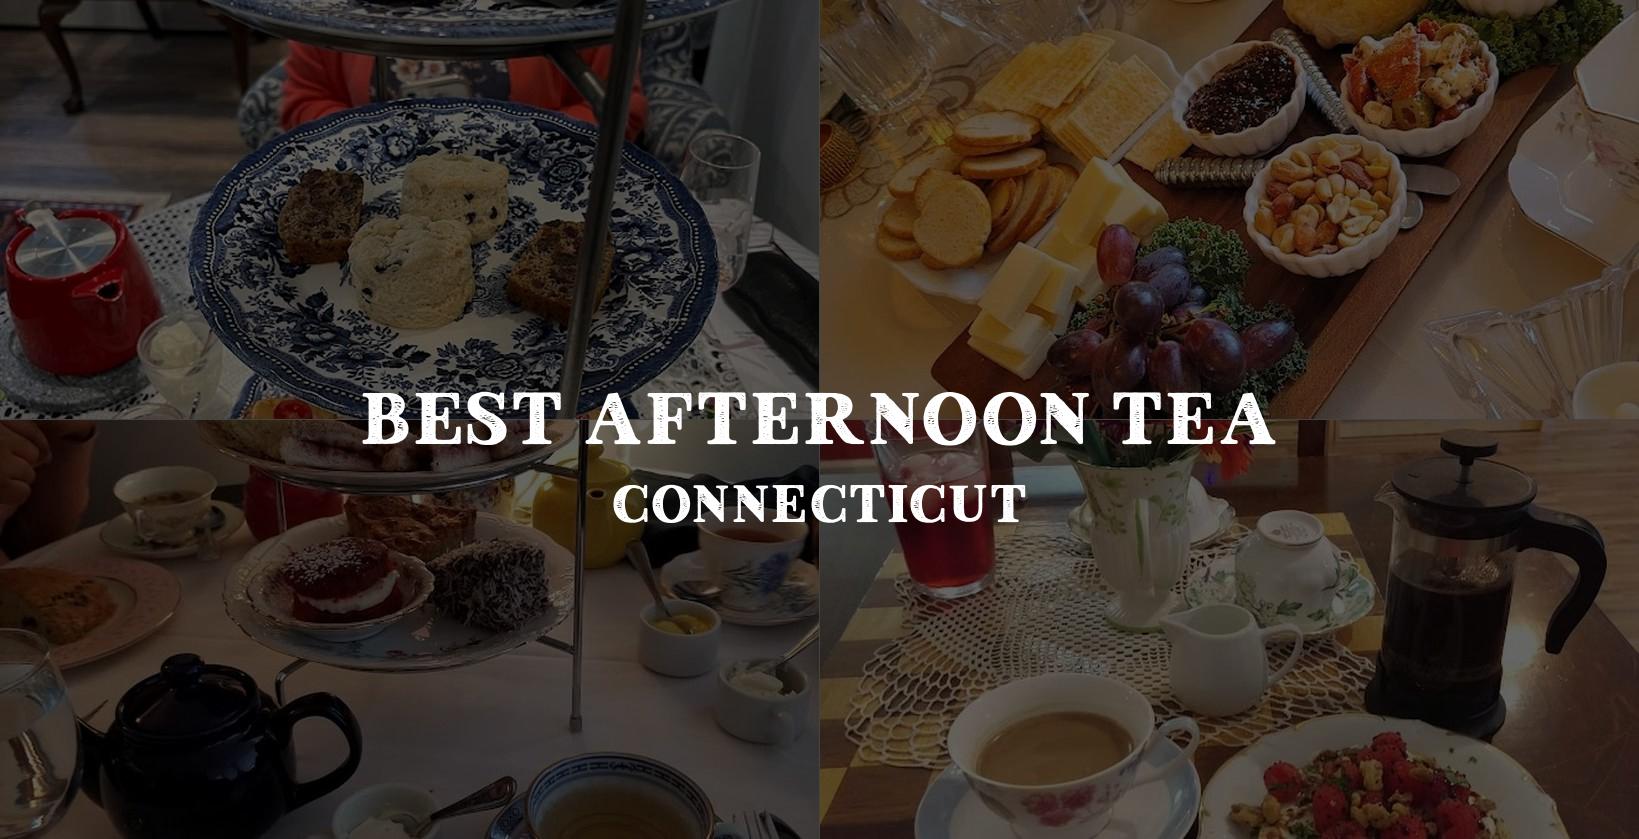 Choosing the perfect spot for afternoon tea in Connecticut